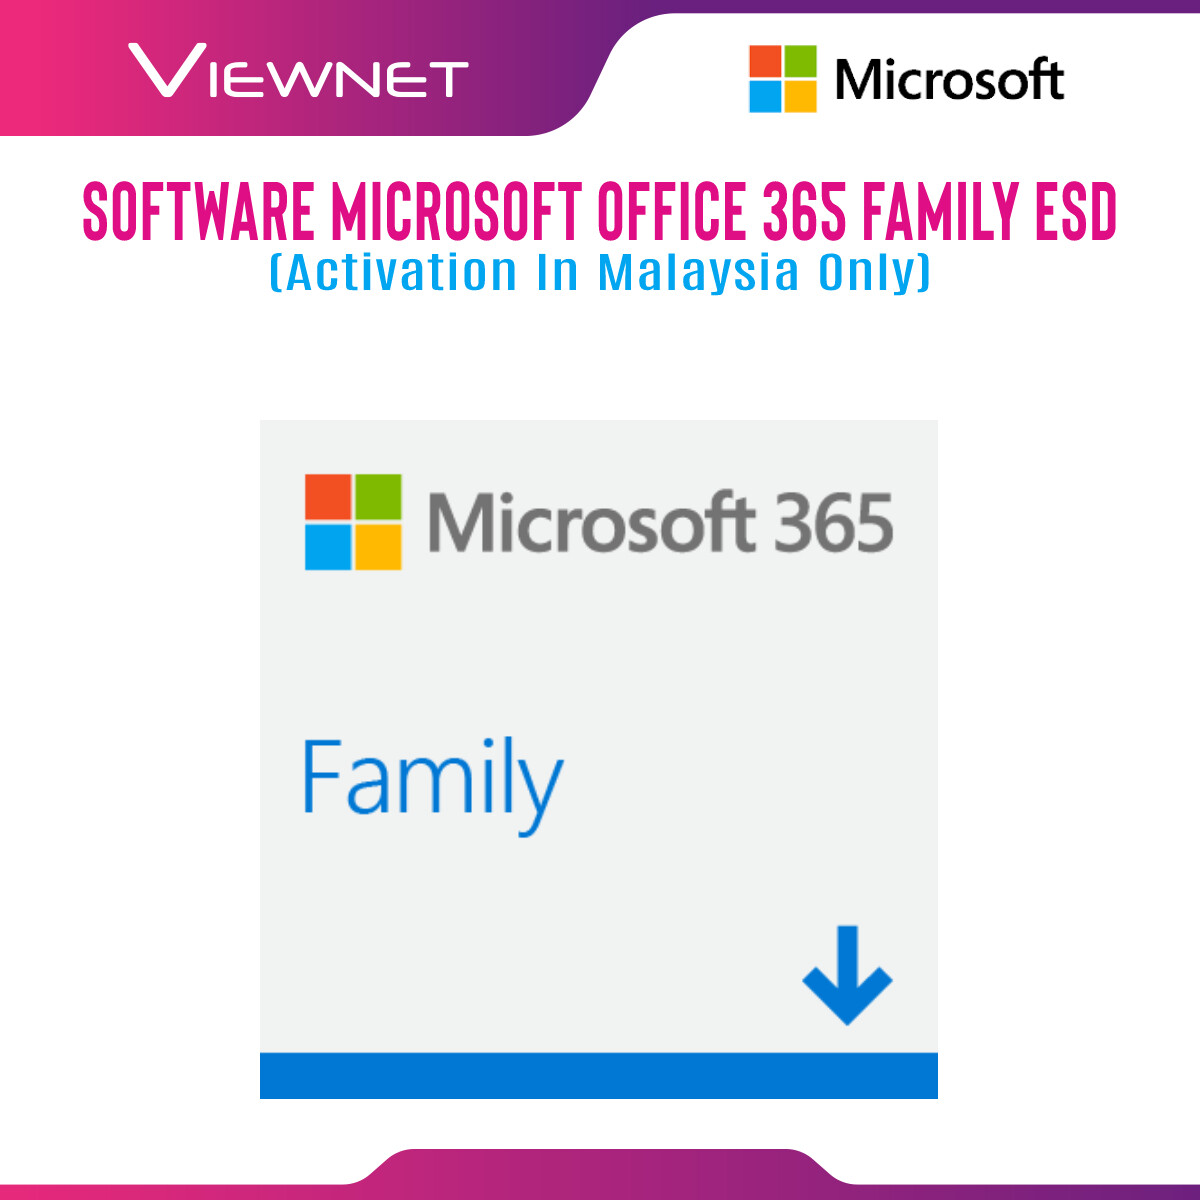 Microsoft 365 Family  3 Months Free with purchase of PC Mac Tablet Smartphone or PC Accessory, Plus 12Month Subscription, up to 6 People  Premium Office Apps  1TB OneDrive Cloud Storage  PC/Mac Download (Renews to 12 Month Subscription)